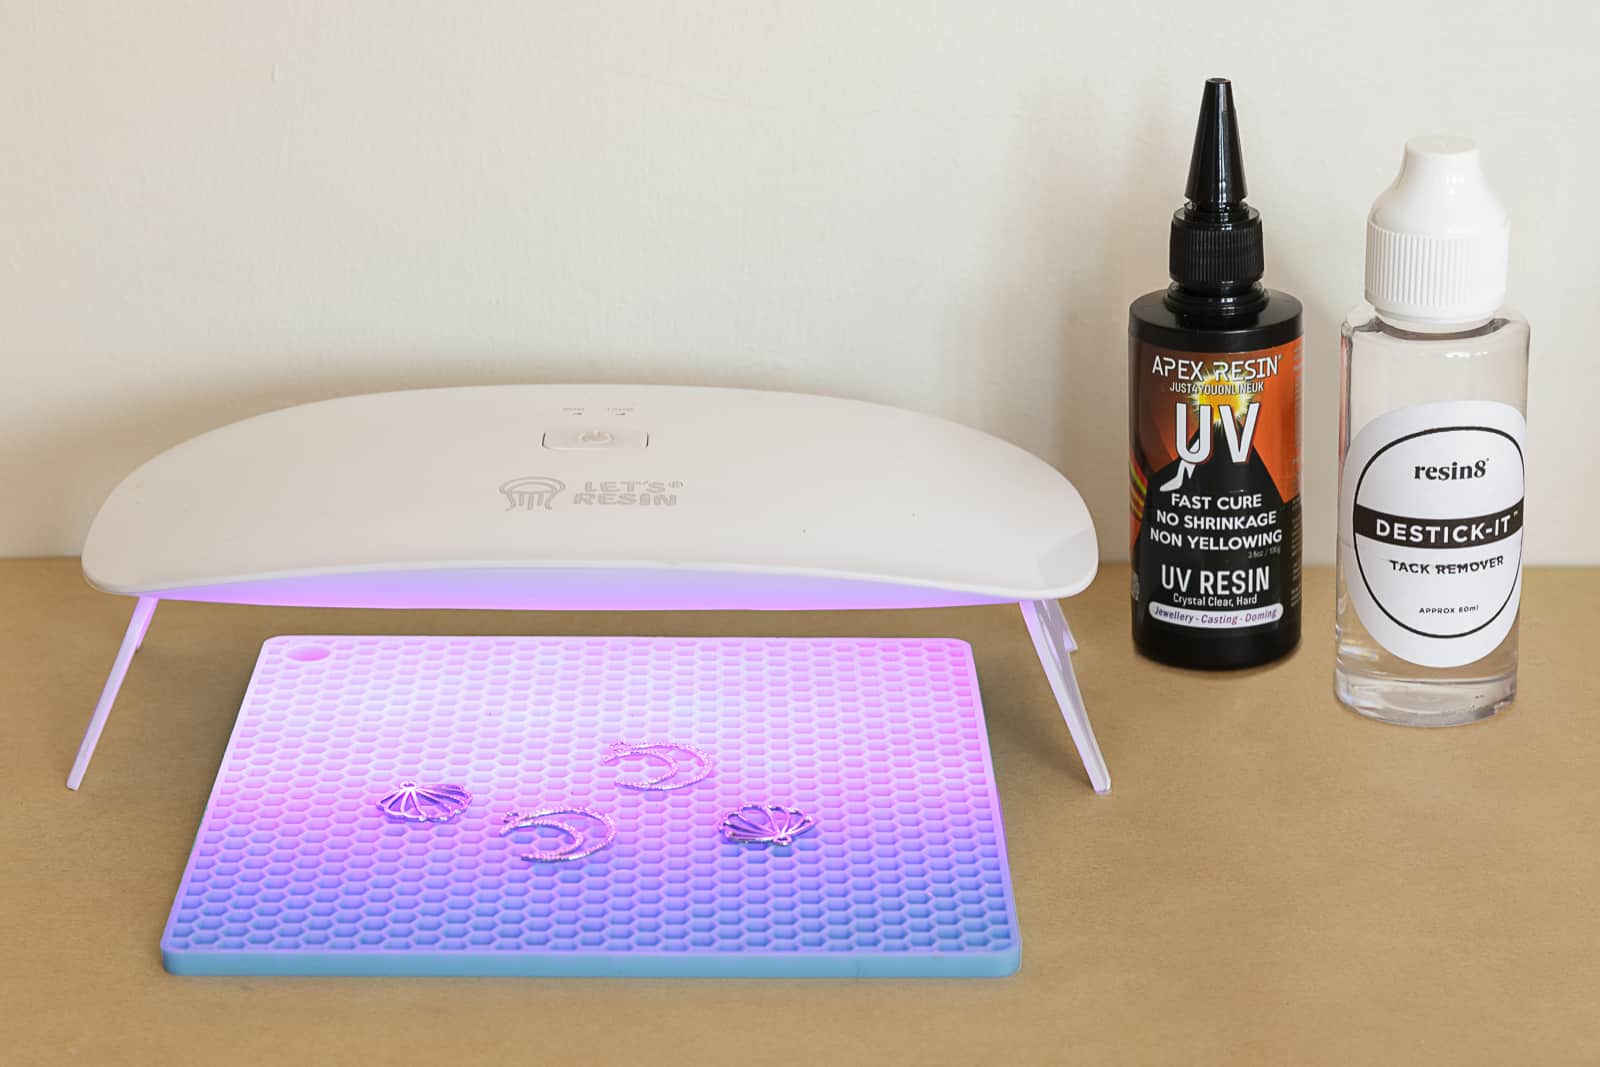 ultraviolet lamp curing resin encased natural products for earrings made by petal and plume